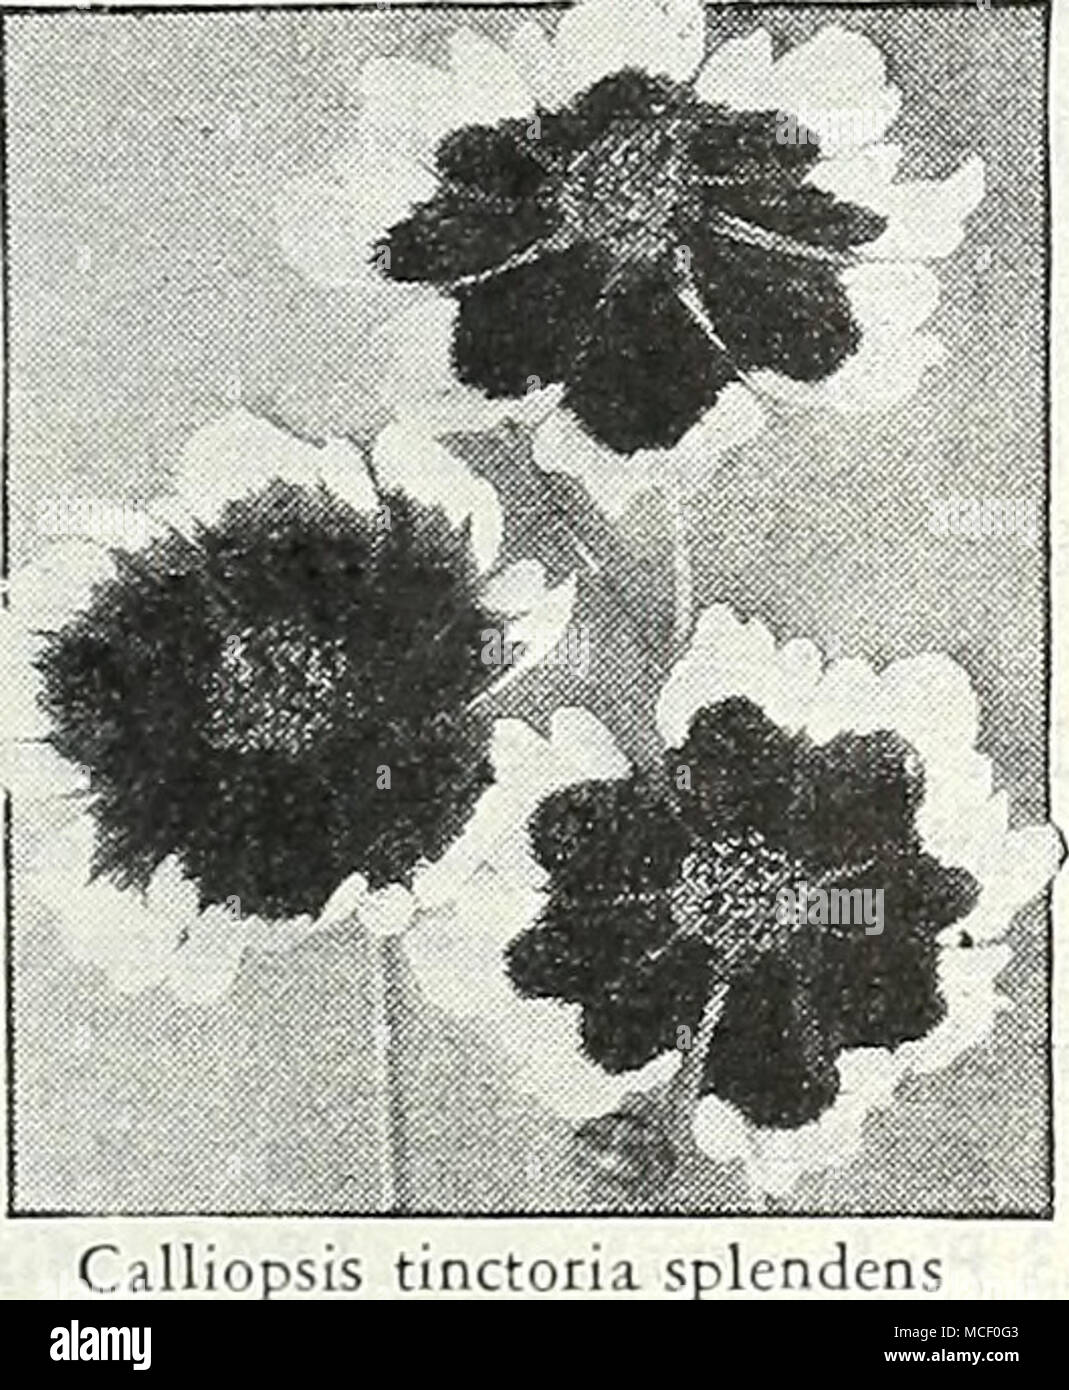 . 1617 Tinctoria splendens. Very free- flowering .and exceptionally showy. Covered with large yellow blooms with extra-large brown-black cen- ters. Blooms all summer long. 314 ft. tall. Pkt. 10c; ;4 oz. 2Sc; oz. 7Sc. Calliopsis Collections 4762 One packet each of the 7 named varieties (No Mixtures) value 70c for 45c 4763 li oz. of the same 7 sepa- rate varieties value $1.75^. ^  for $1.25 V r Tall Varieties These grow from 2^4 to 3 feet tall and produce hundreds of brilliantly colored blooms that are most effective. 1614 Golden Crown. BriHiant golden yellow with glossy maroon center zone. 2 ft Stock Photo